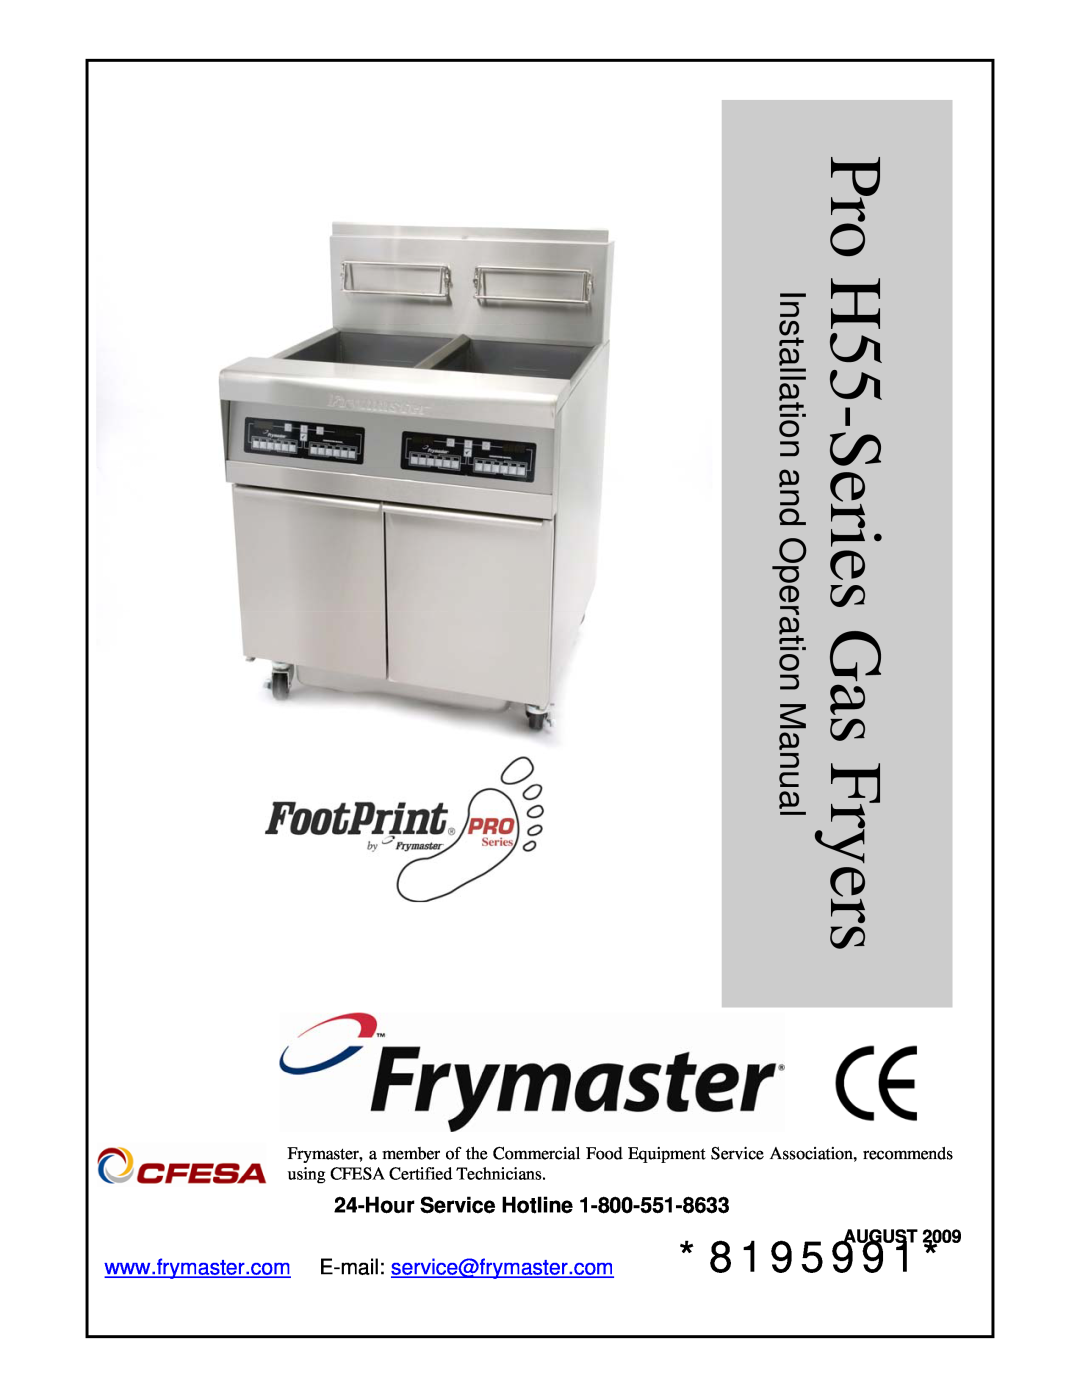 Frymaster operation manual HourService Hotline, Pro H55-SeriesGas Fryers 